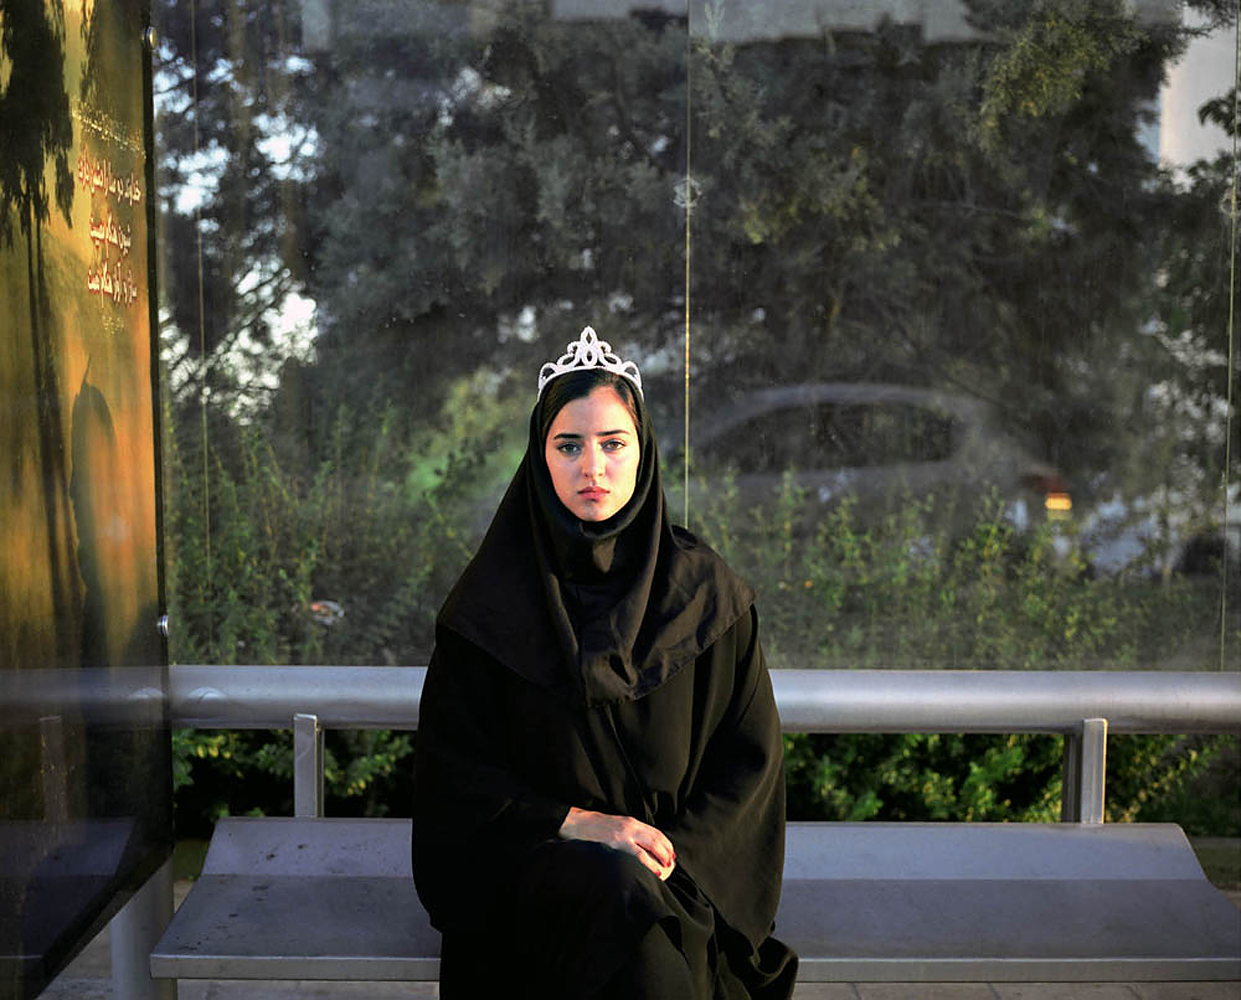 Newsha Tavakolian's photography focuses on women's issues in the Middle East. Recently she began a project making portraits of female Iranian singers who are not allowed to sing solo. Based upon their stories Tavakolian created photographs in December 2010, which act as their dream CD covers, including album titles. However, the cases are empty.